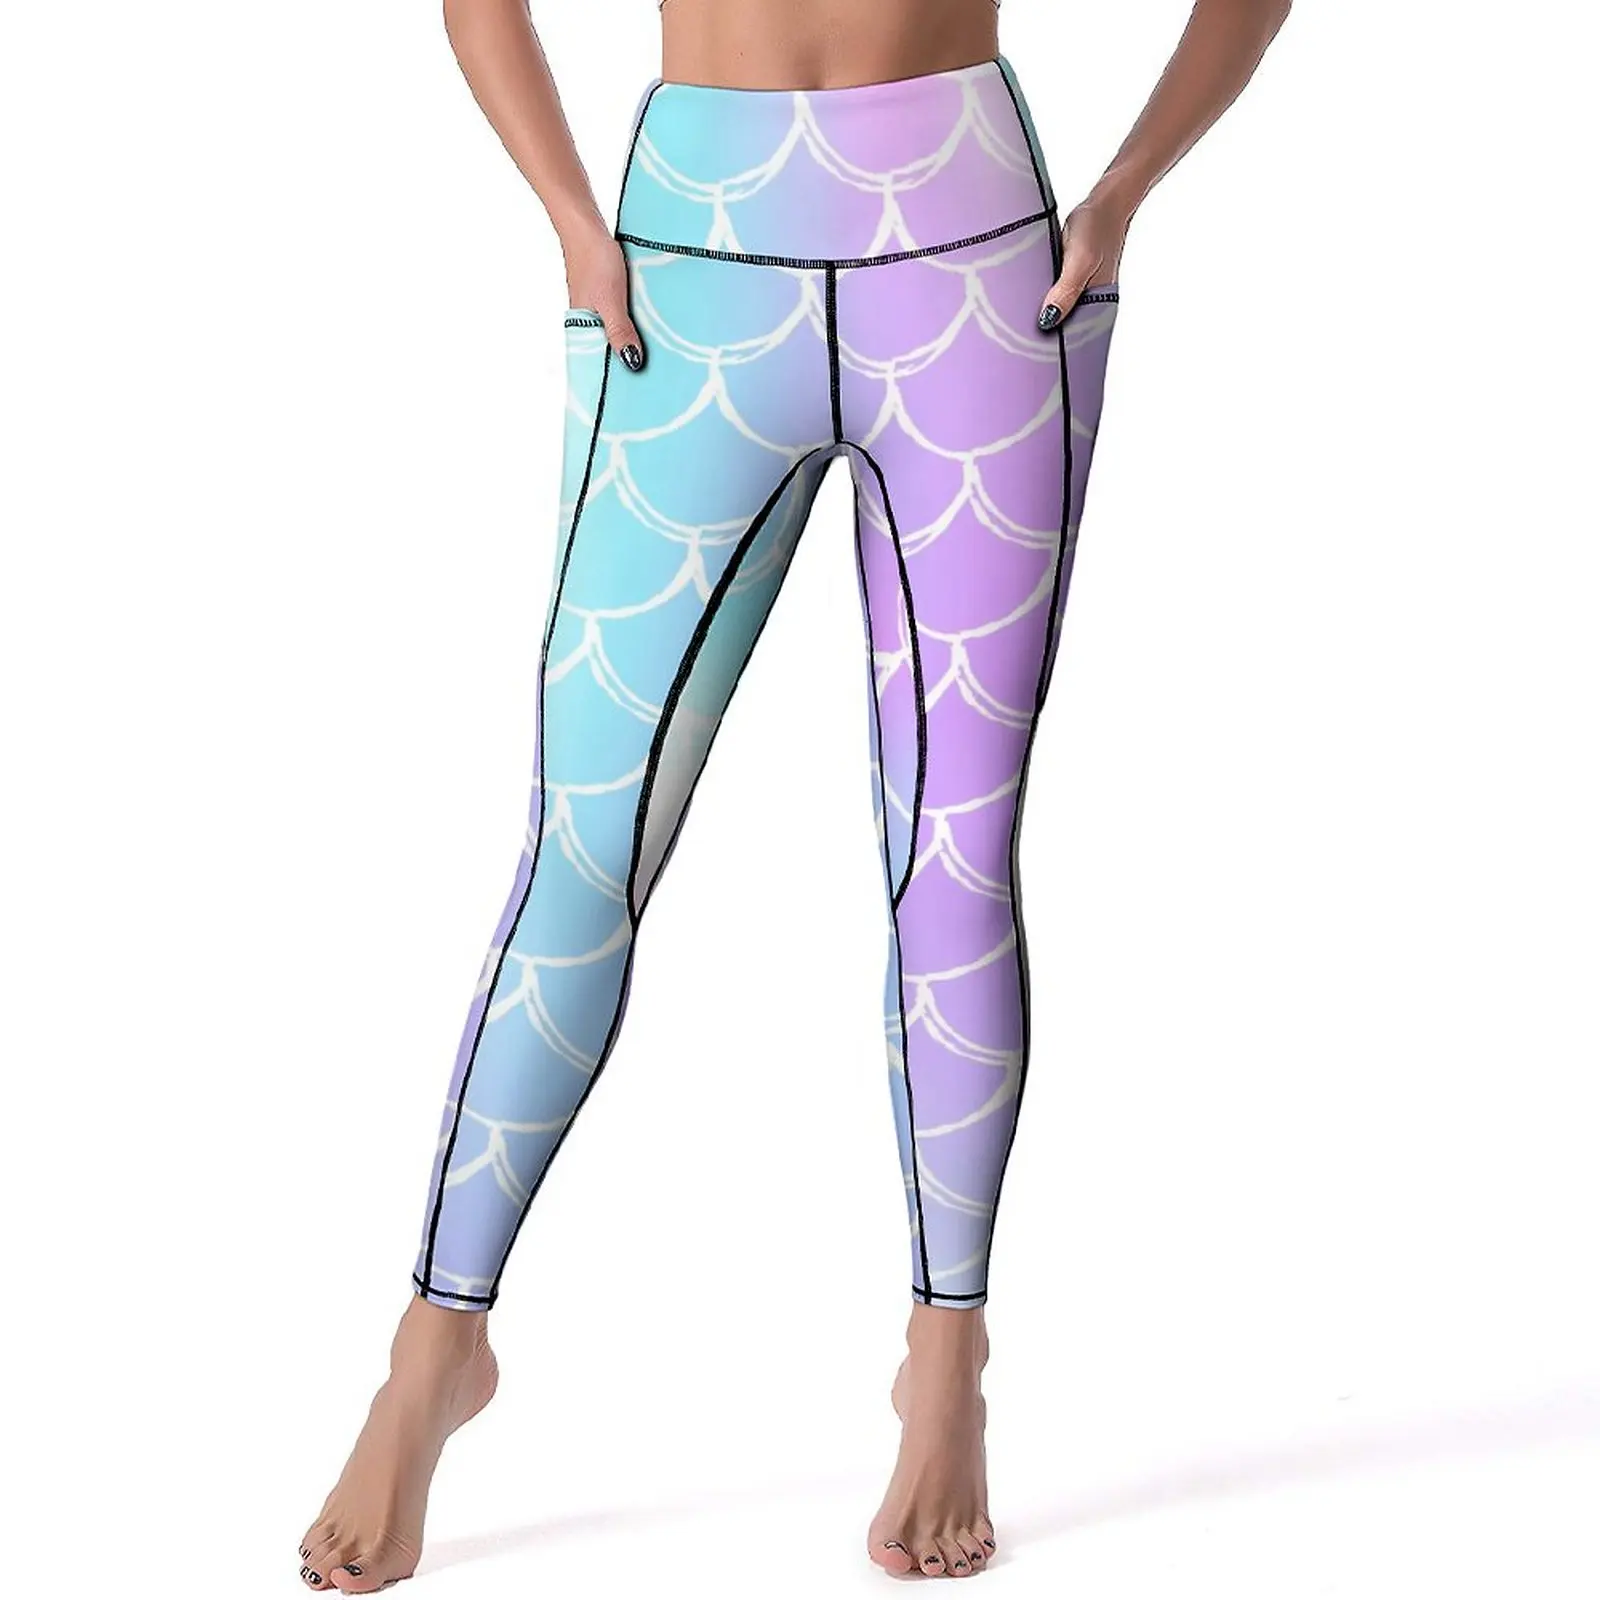 

Ombre Print Yoga Pants Sexy Mermaid Scales Graphic Leggings Push Up Fitness Gym Leggins Women Breathable Stretch Sport Legging